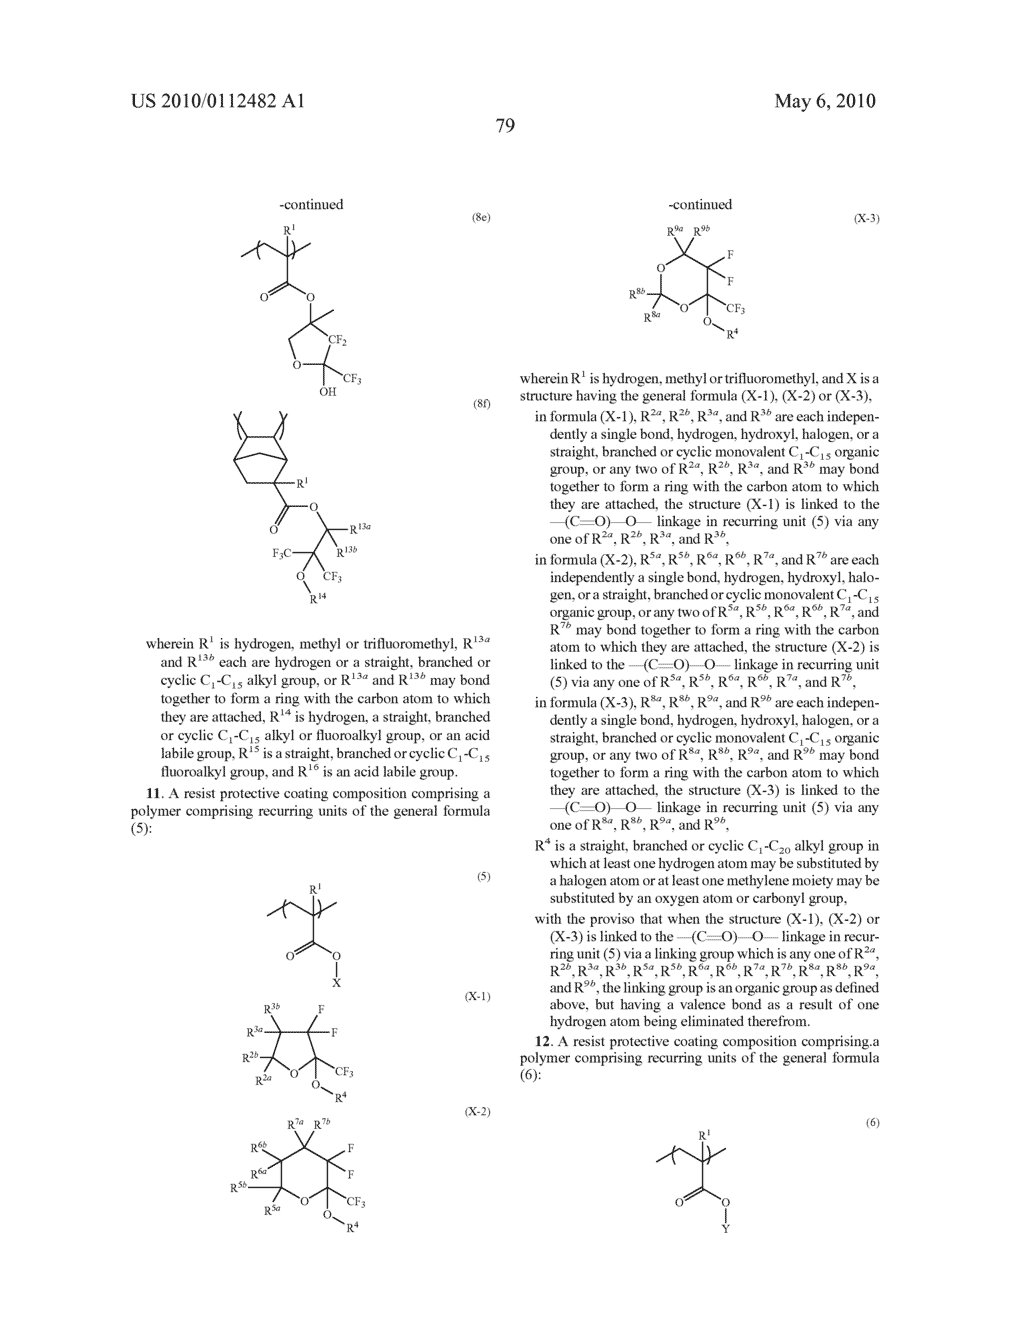 FLUORINATED MONOMER OF CYCLIC ACETAL STRUCTURE, POLYMER, RESIST PROTECTIVE COATING COMPOSITION, RESIST COMPOSITION, AND PATTERNING PROCESS - diagram, schematic, and image 80